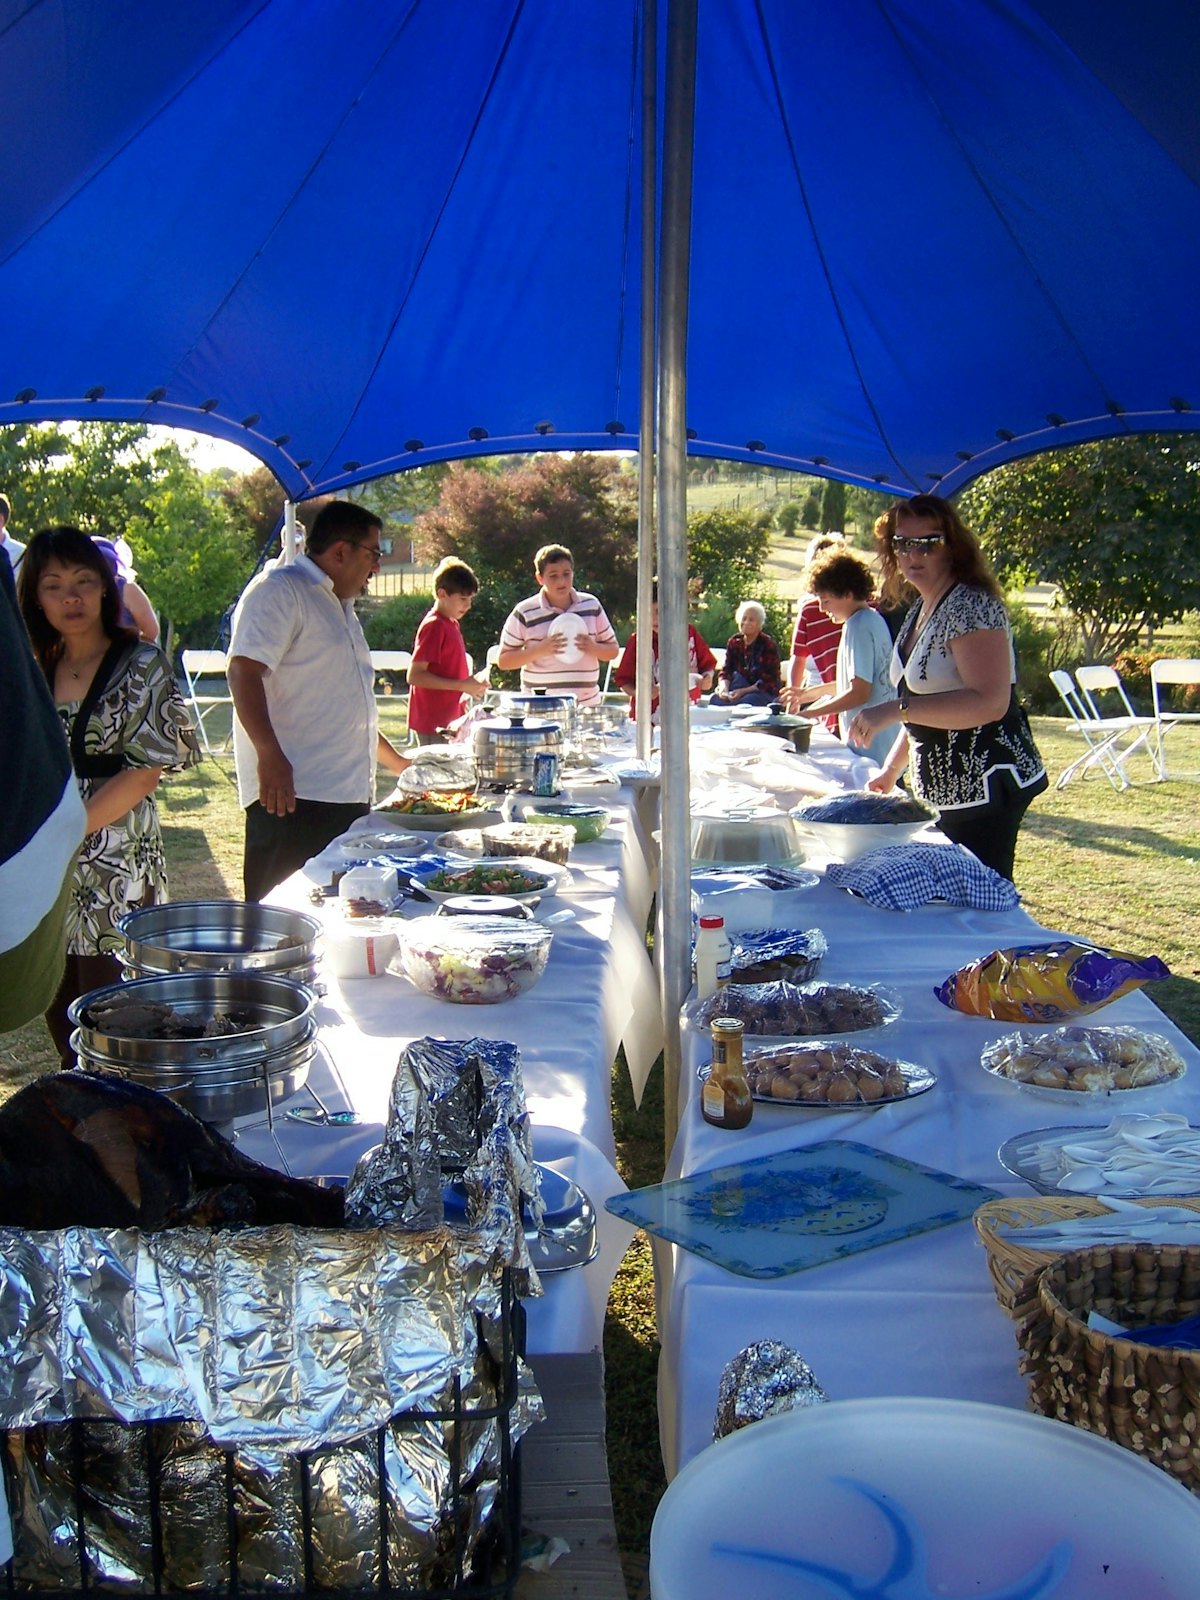 Friends who gathered in Eureka in the Waikato region of New Zealand set the banquet table for their Naw Ruz celebration.